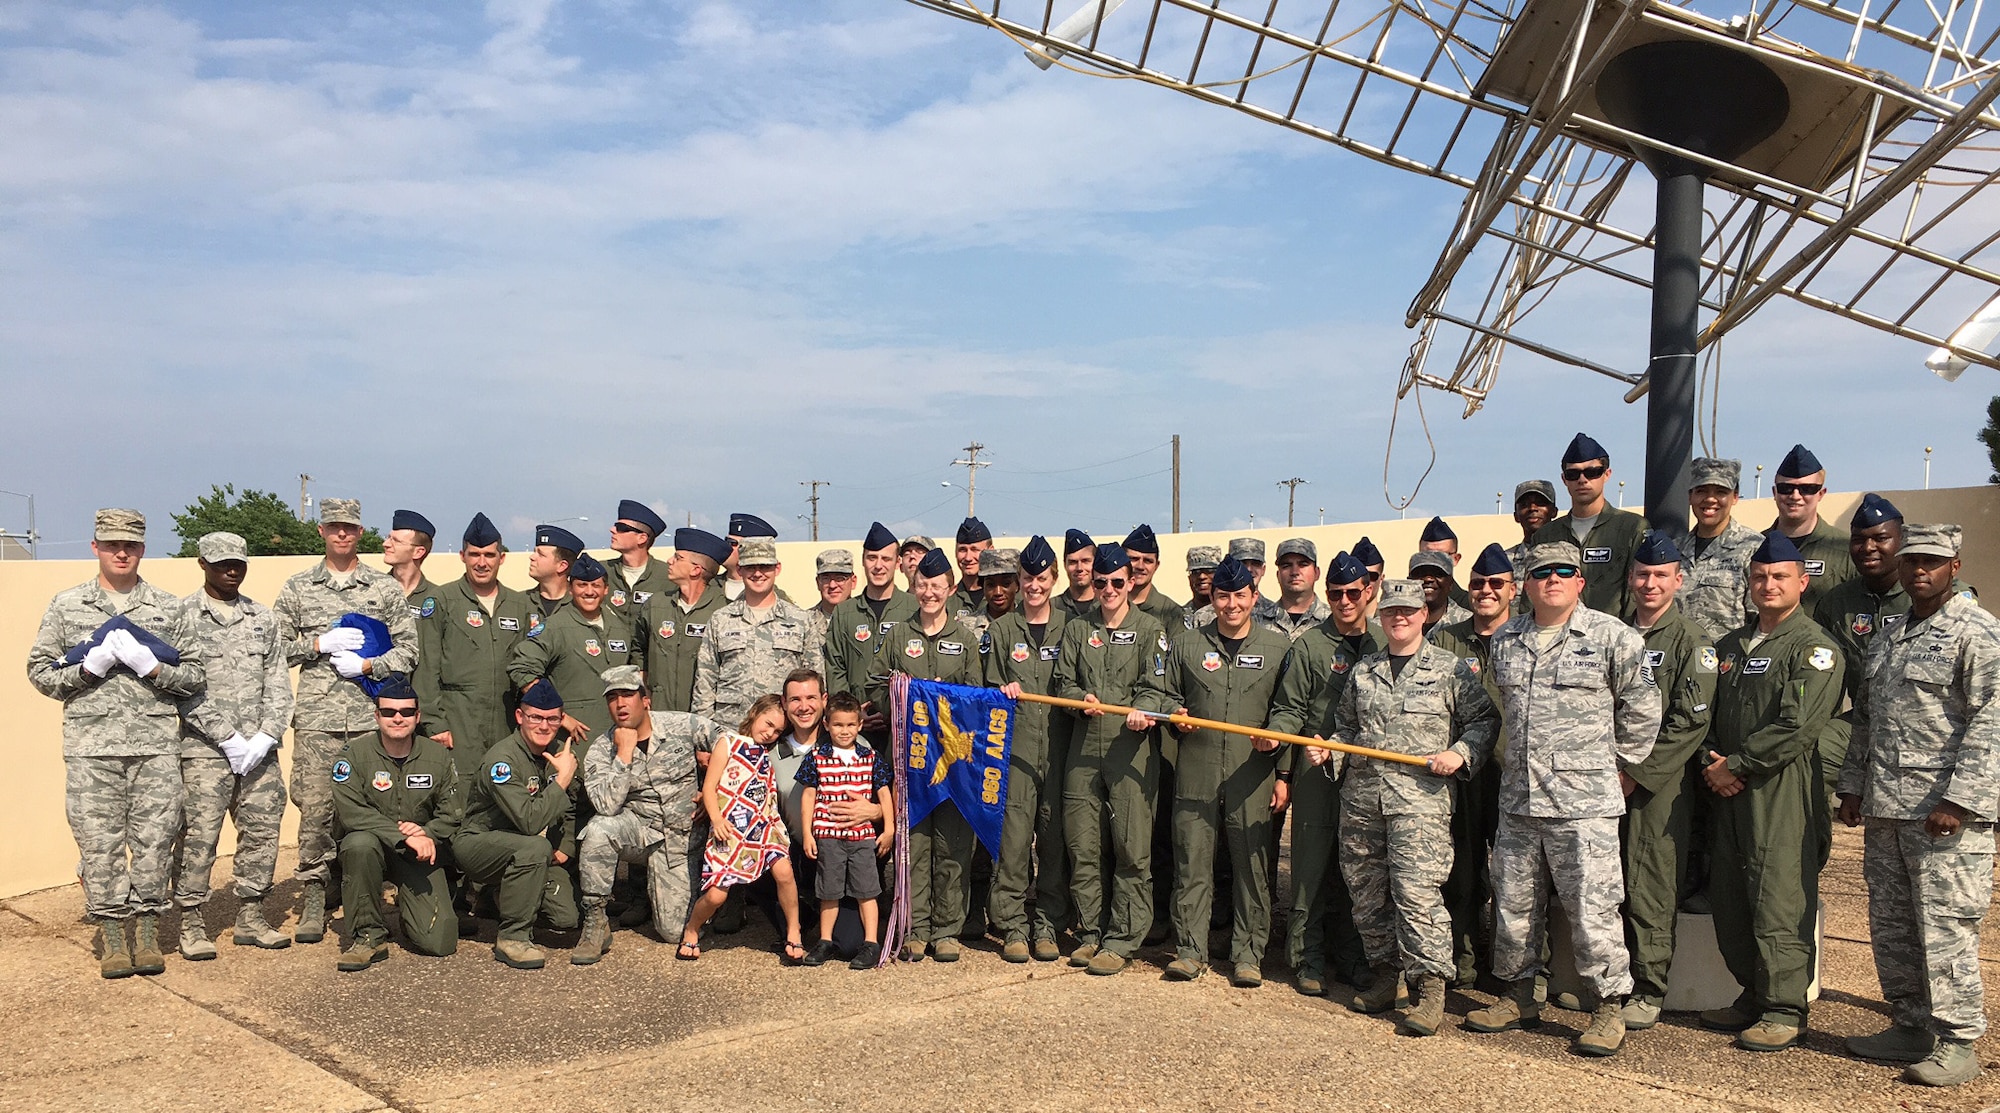 Current and former members of the 960th Airborne Air Control Squadron, along with members of the Tinker Honor Guard, gather at the Wright Flyer memorial following a special military retreat service honoring past, present and future members of the 960th that concluded the unit’s 15-year anniversary celebration July 1. (Air Force photo)